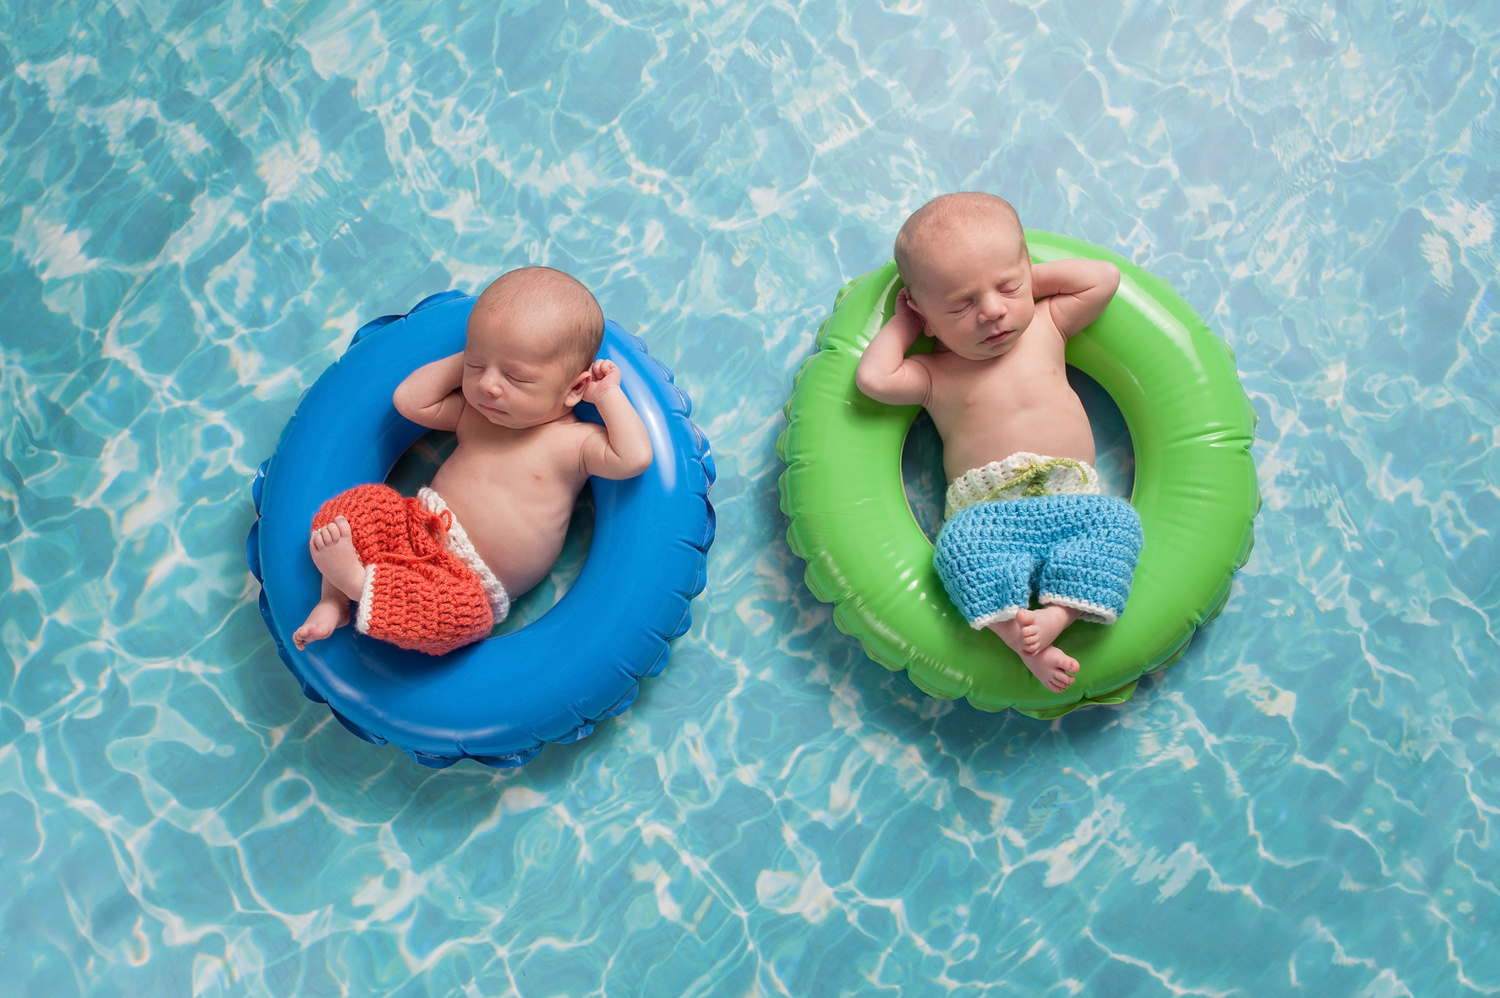 Four week old twin, newborn, baby boys wearing crocheted board shorts and sleeping on a tiny inflatable swim rings. Shot in the studio on a background to look like swimming pool water.